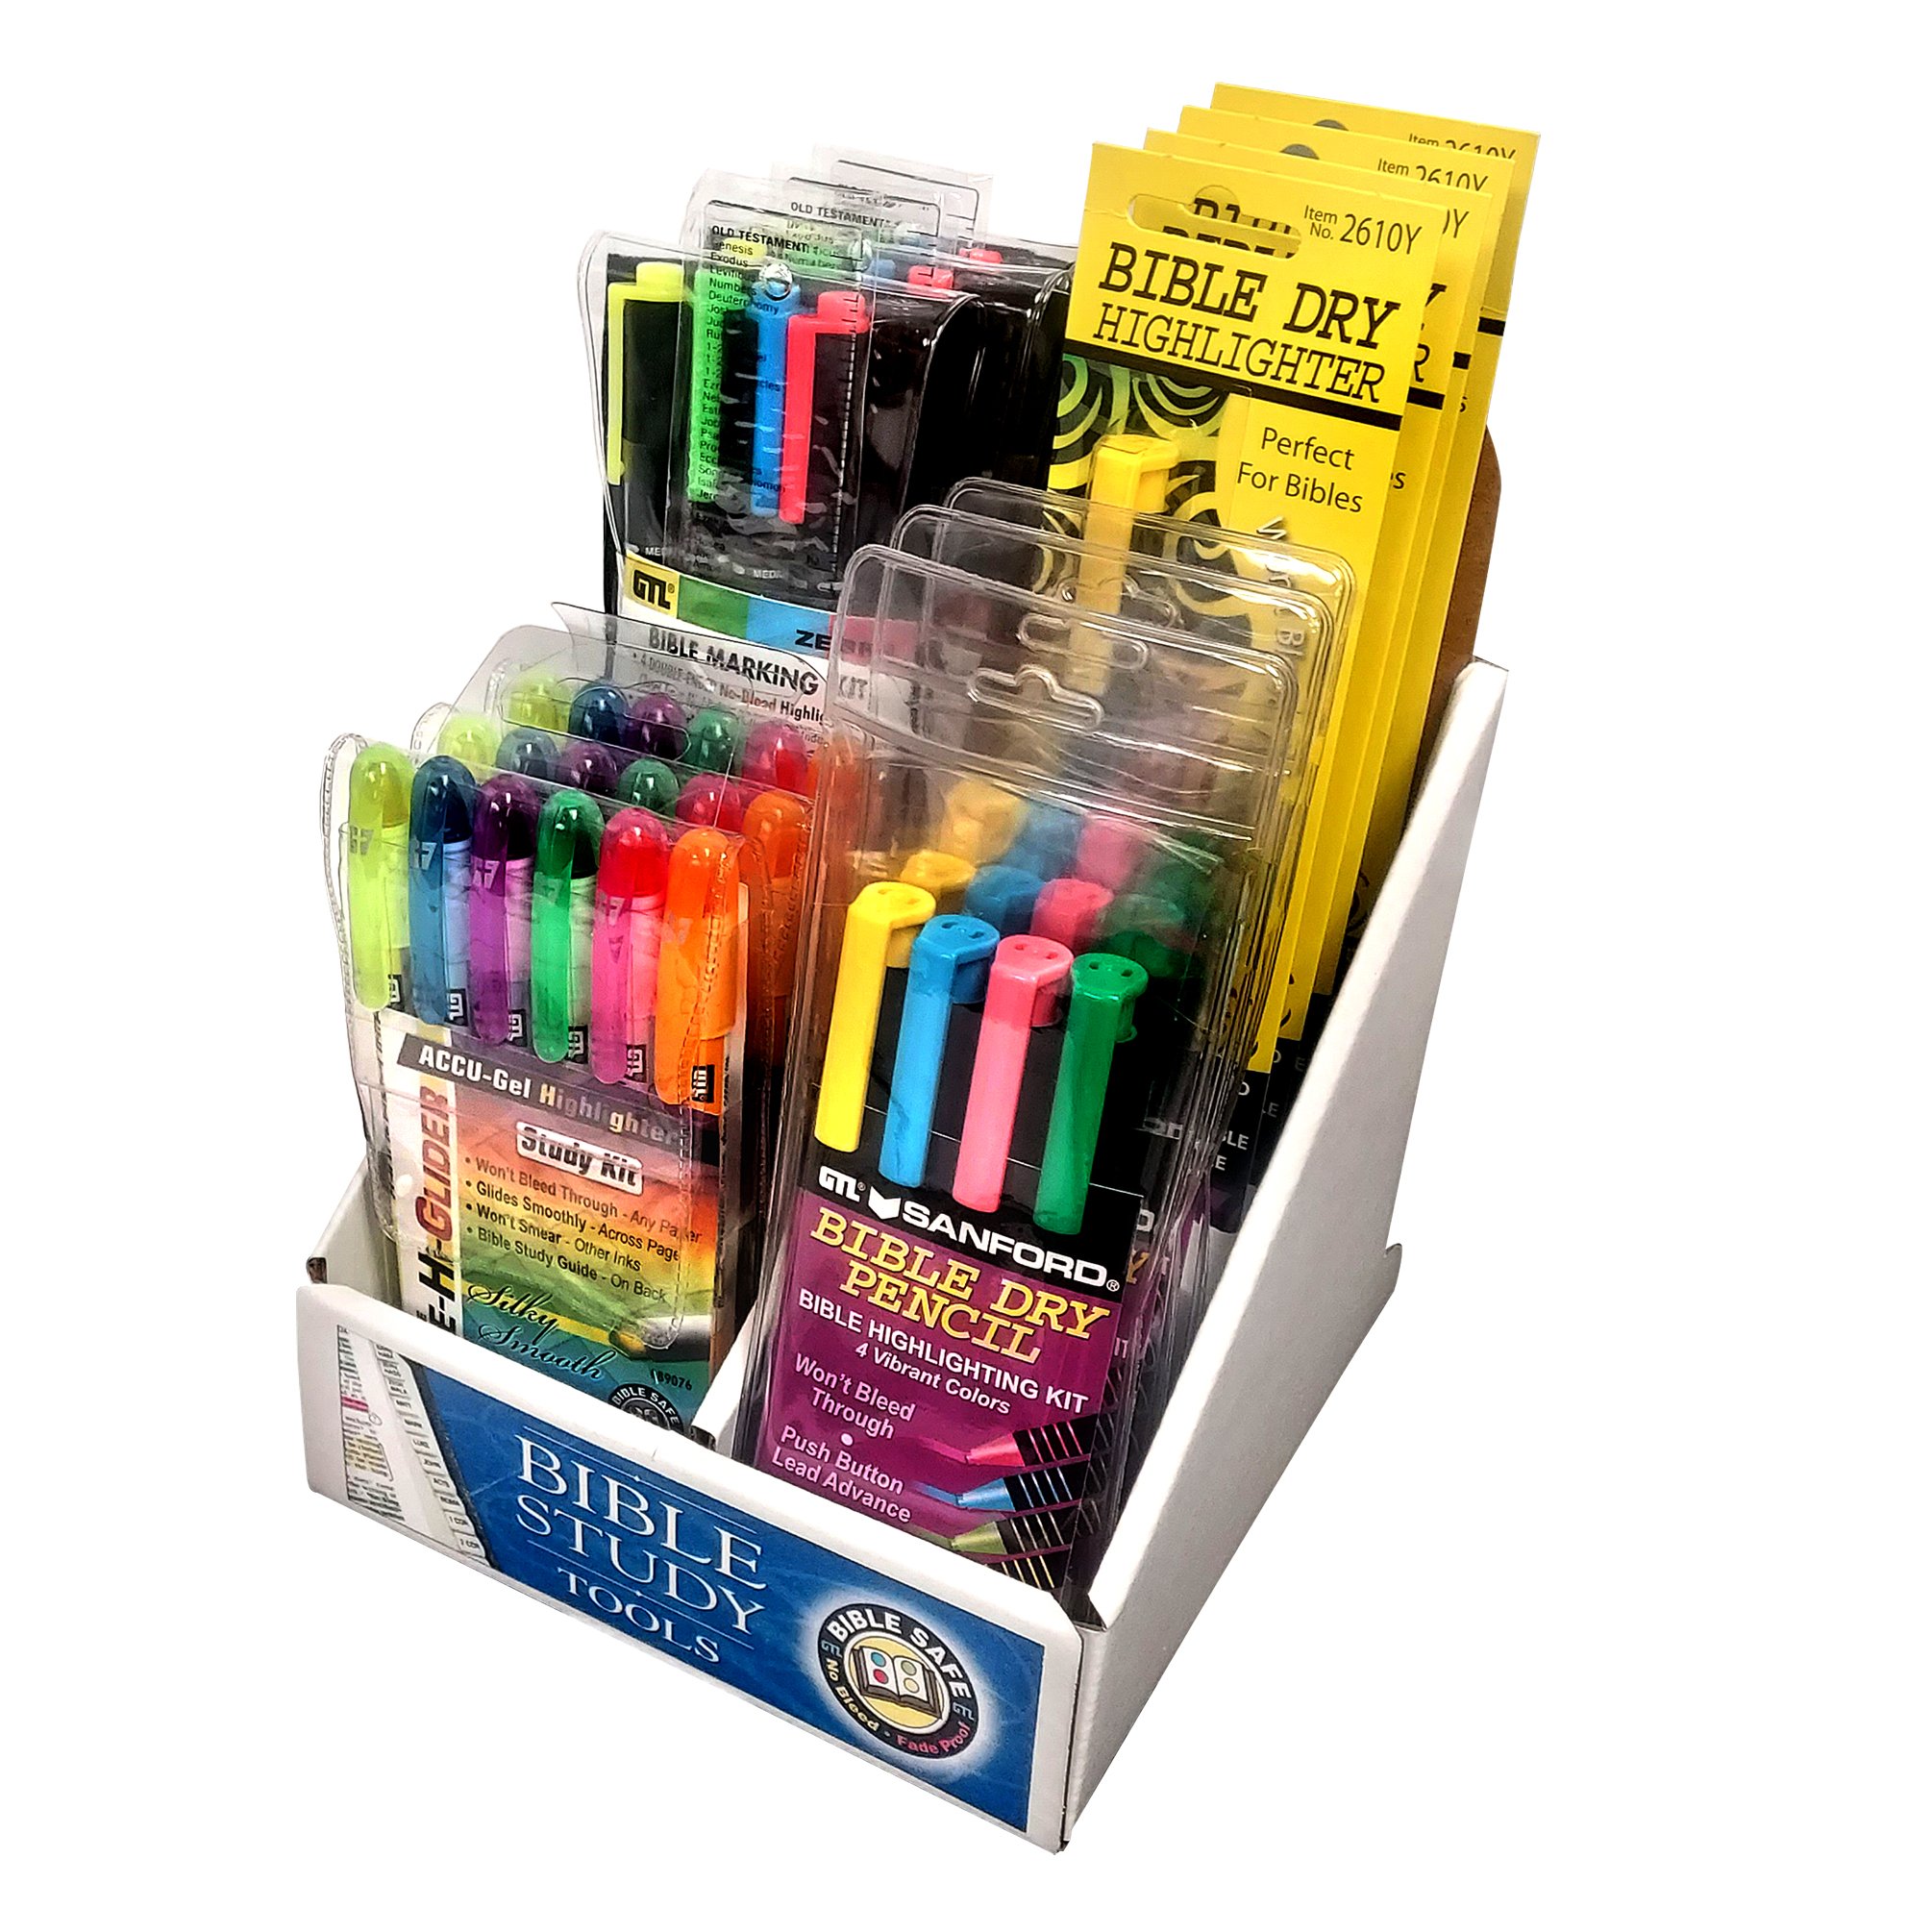 Highlighter For Bible Dry Asst Colors Retractable Yellow, Pink, Blue, Green